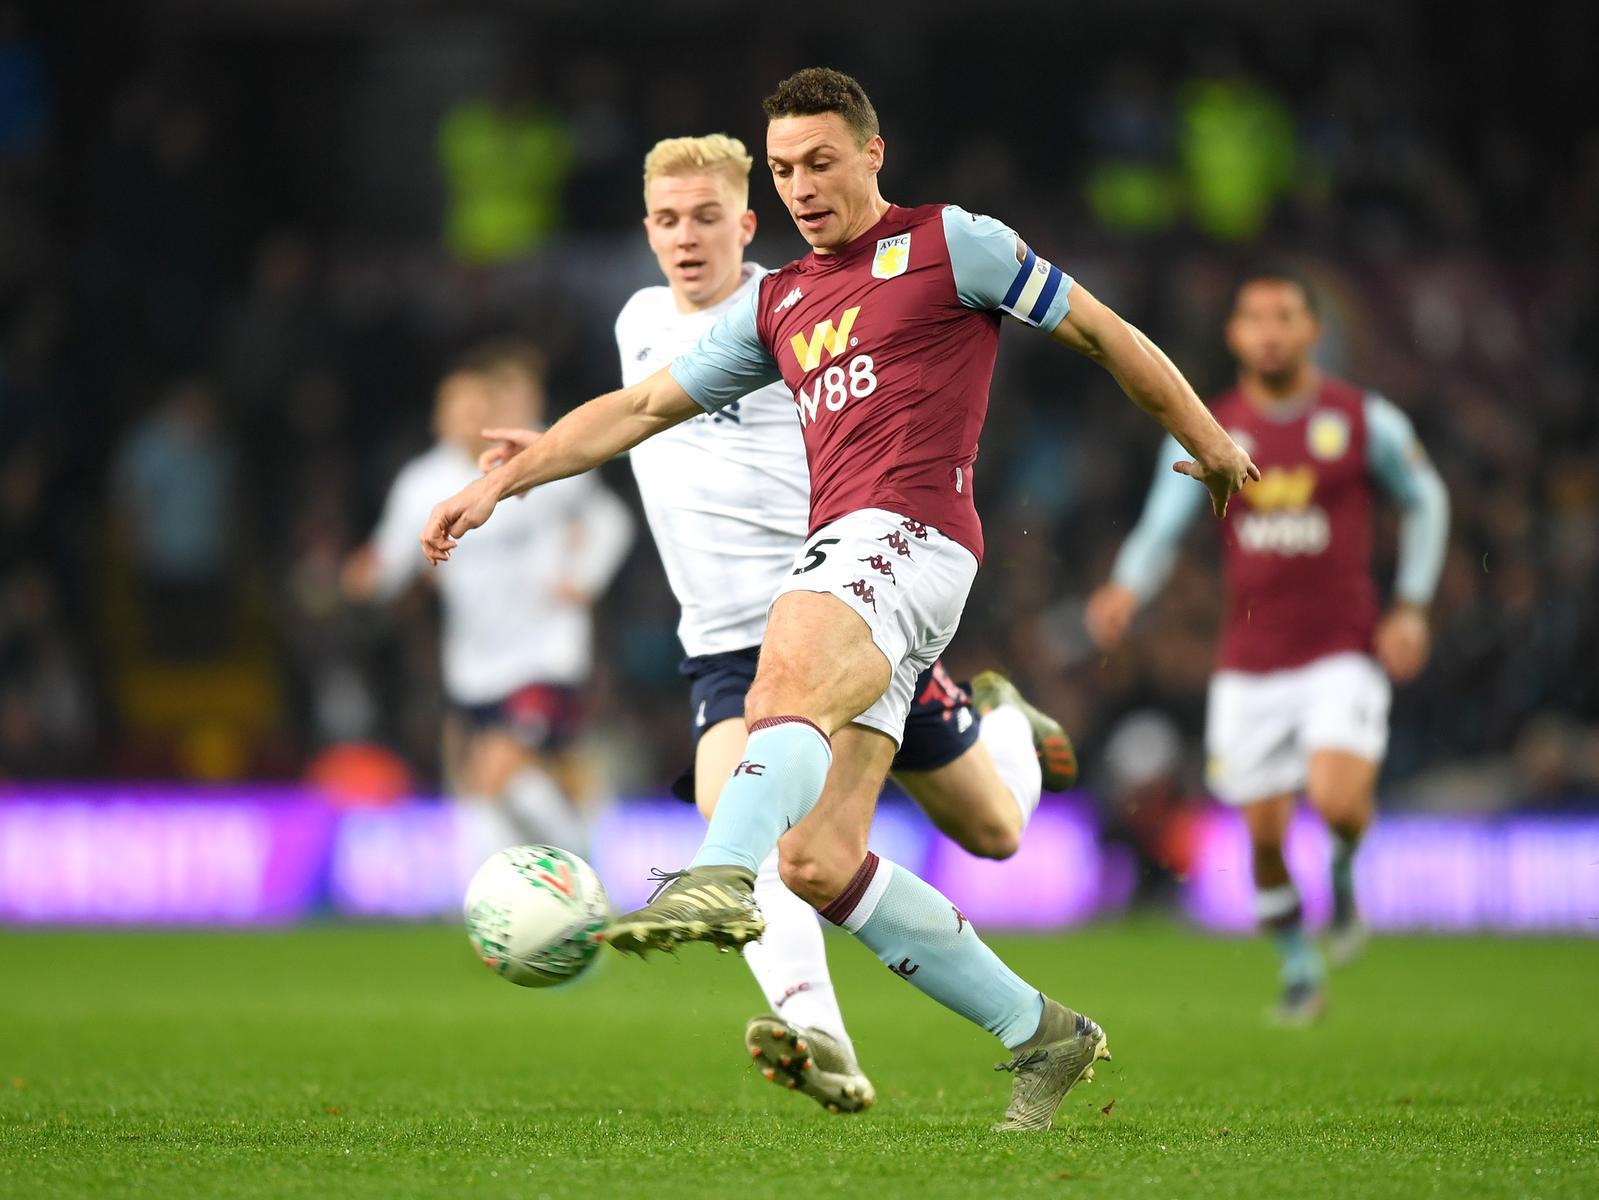 Stoke City have confirmed the signing of James Chester on loan from Aston Villa. He's looking to revive his career with a solid spell in the second tier. (Stoke Sentinel)